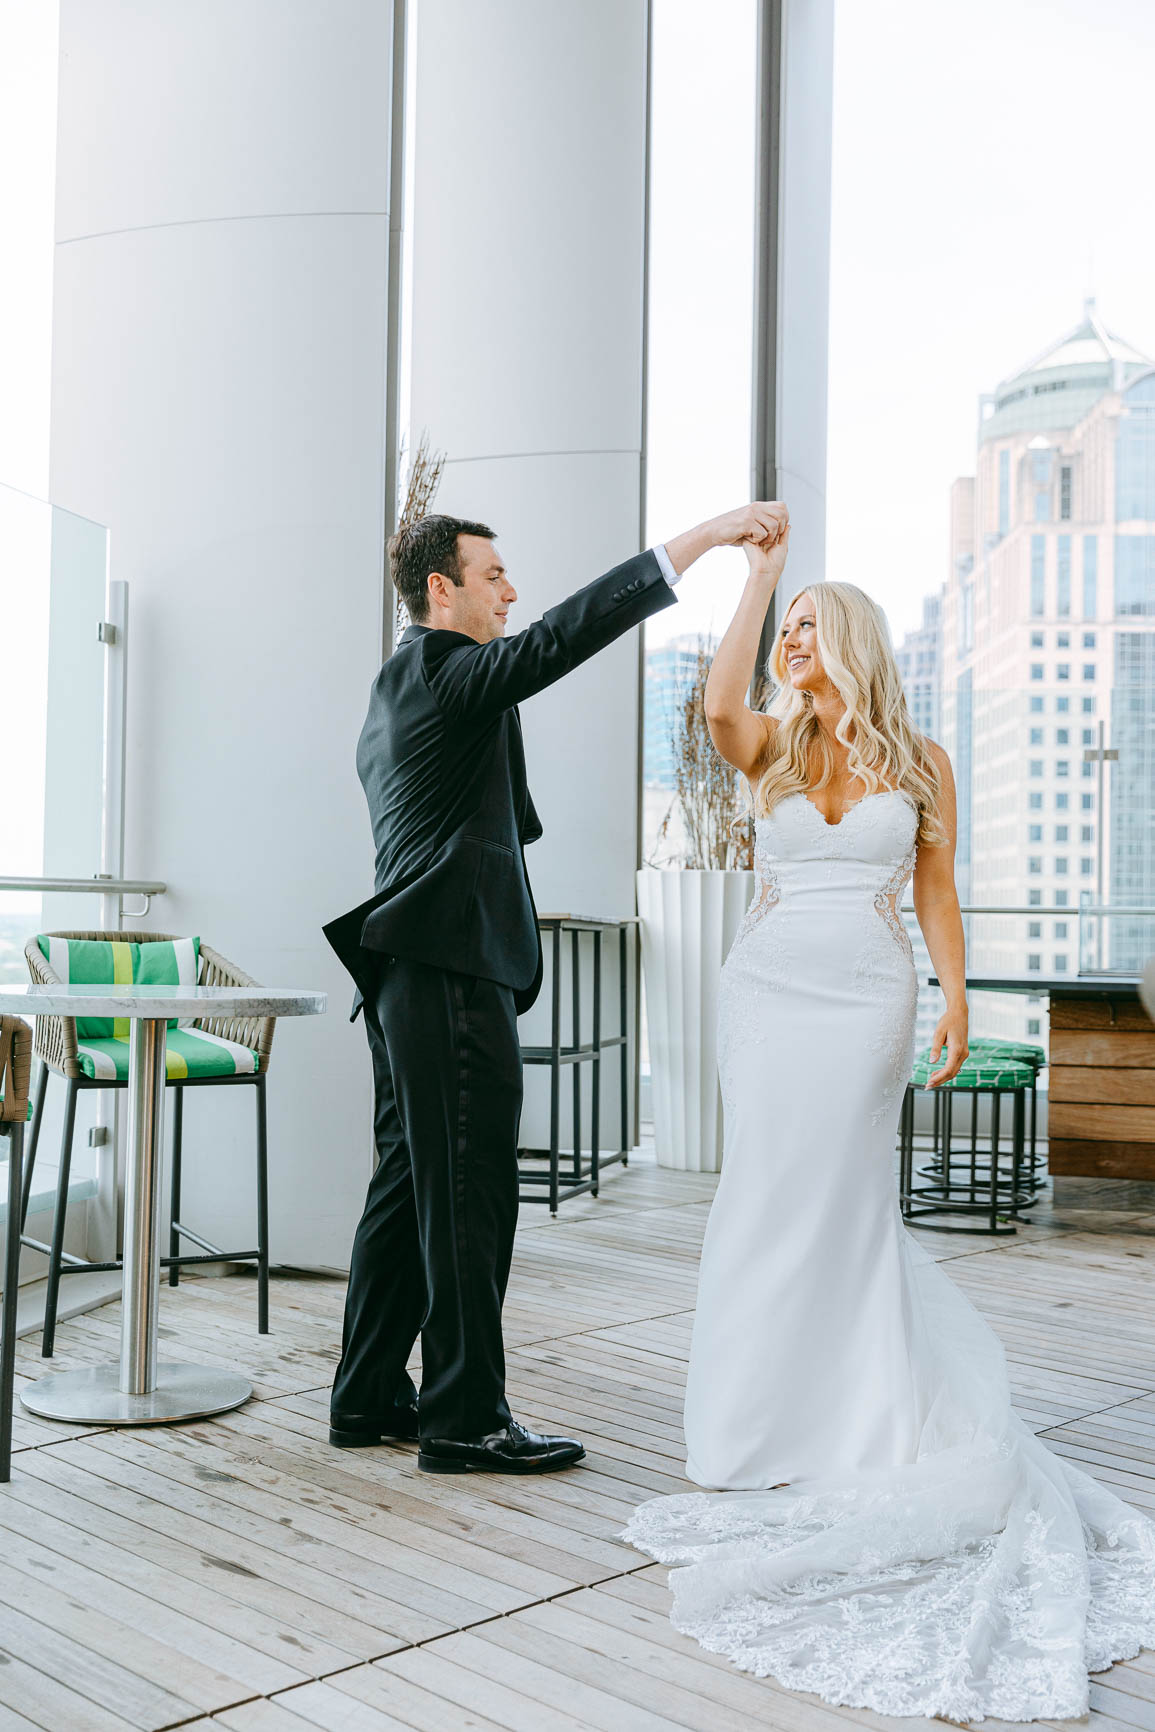 Bride and groom first look at merchant & trade rooftop shot by Nhieu Tang Photography | nhieutang.com